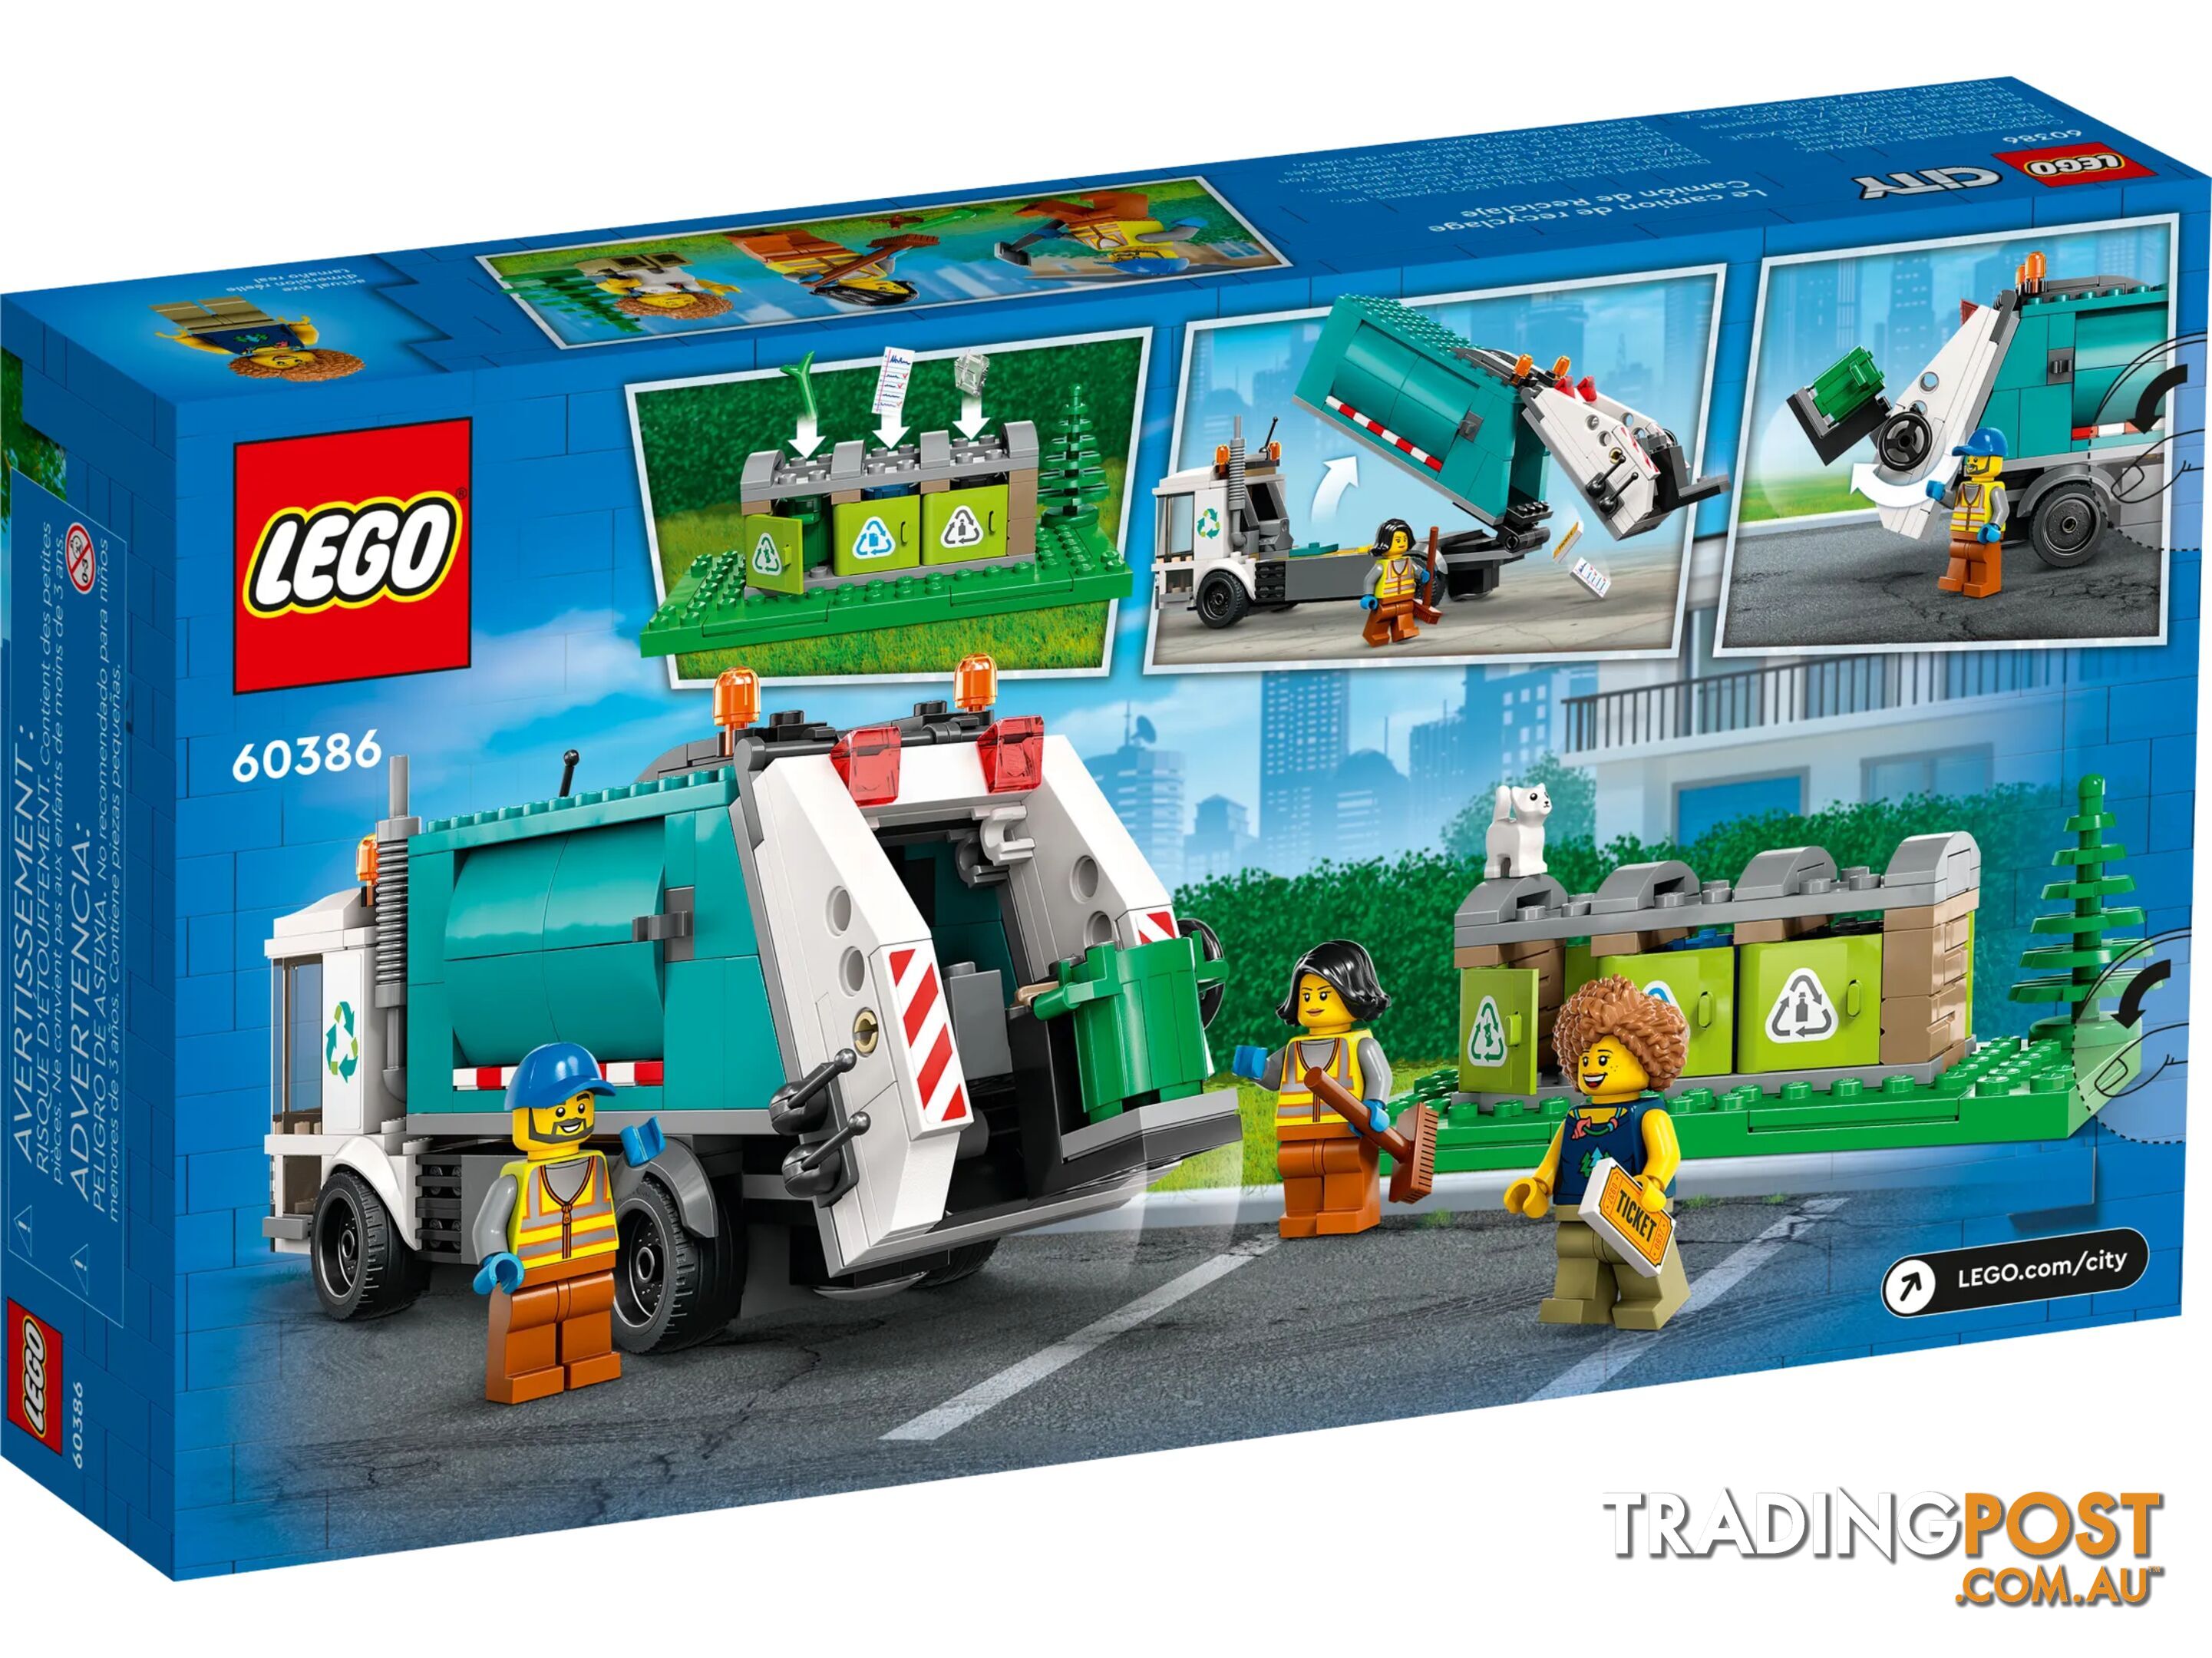 LEGO 60386 Recycling Truck - City - 5702017416410